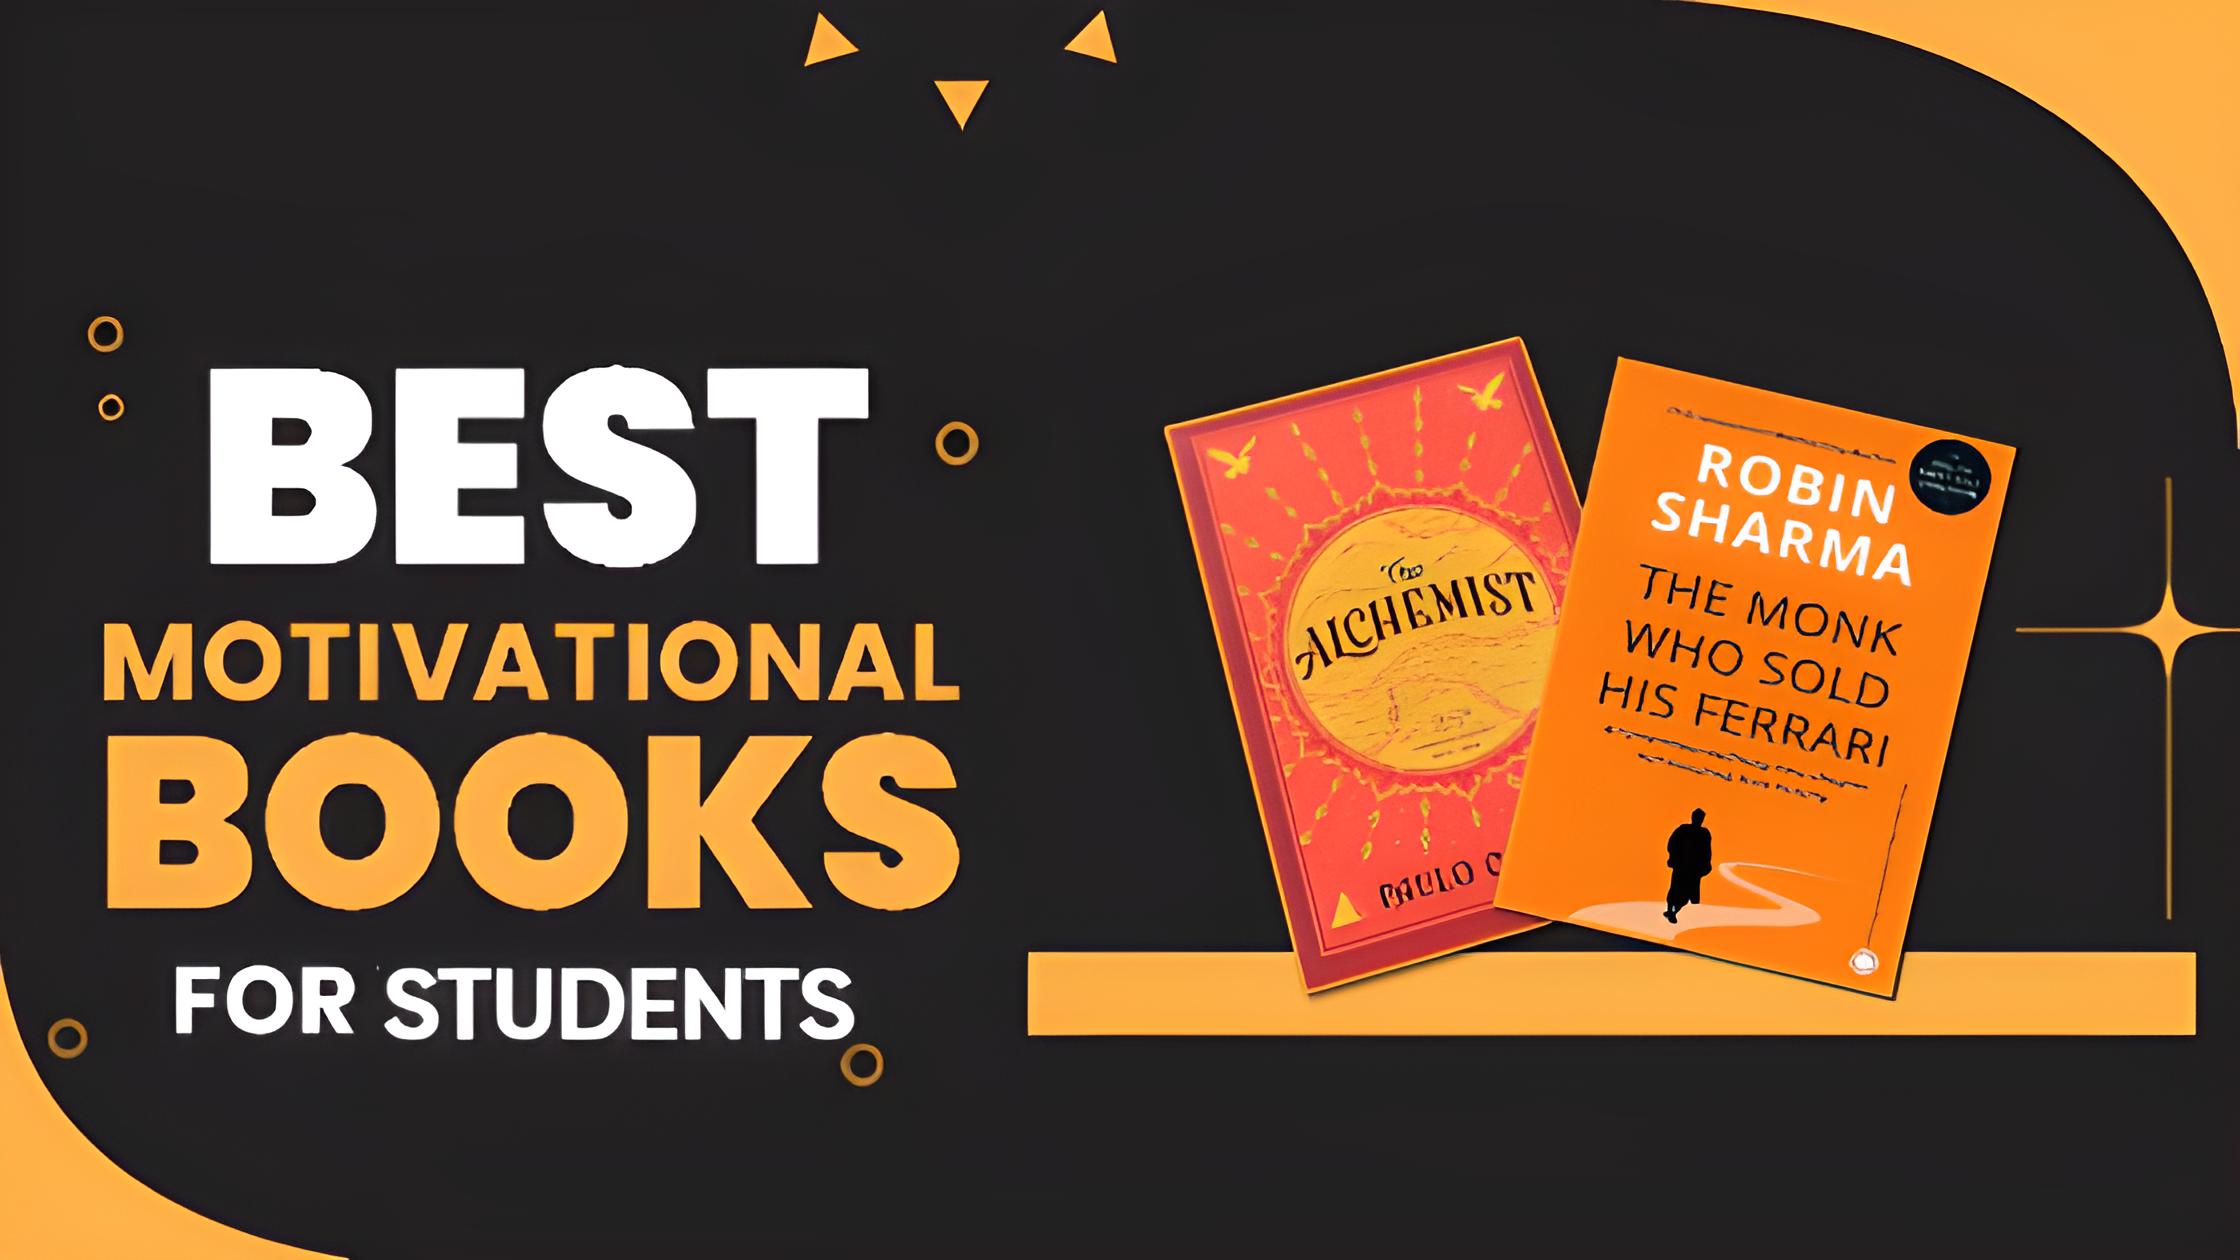 The 10 Best Motivational Books for Students in India